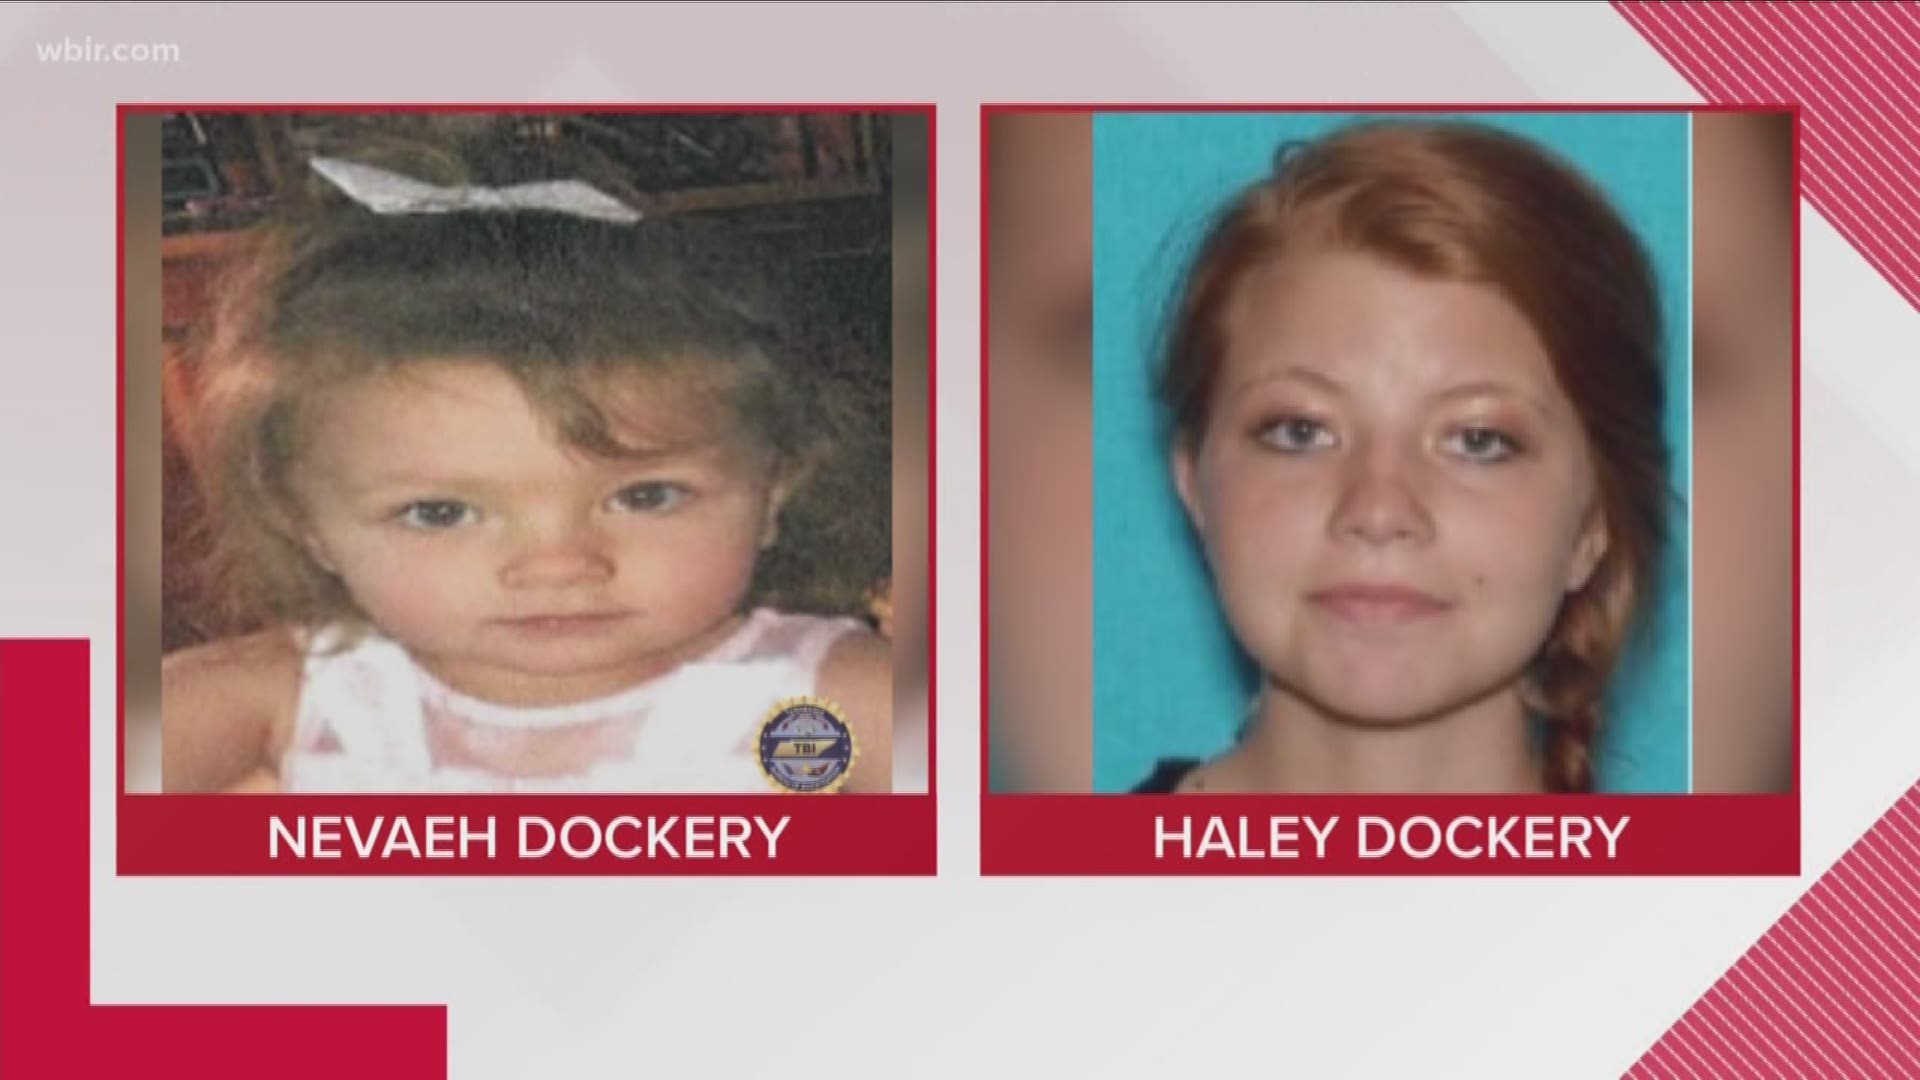 Investigators said she was last seen in Maryville with her non-custodial mother, Haley Dockery.